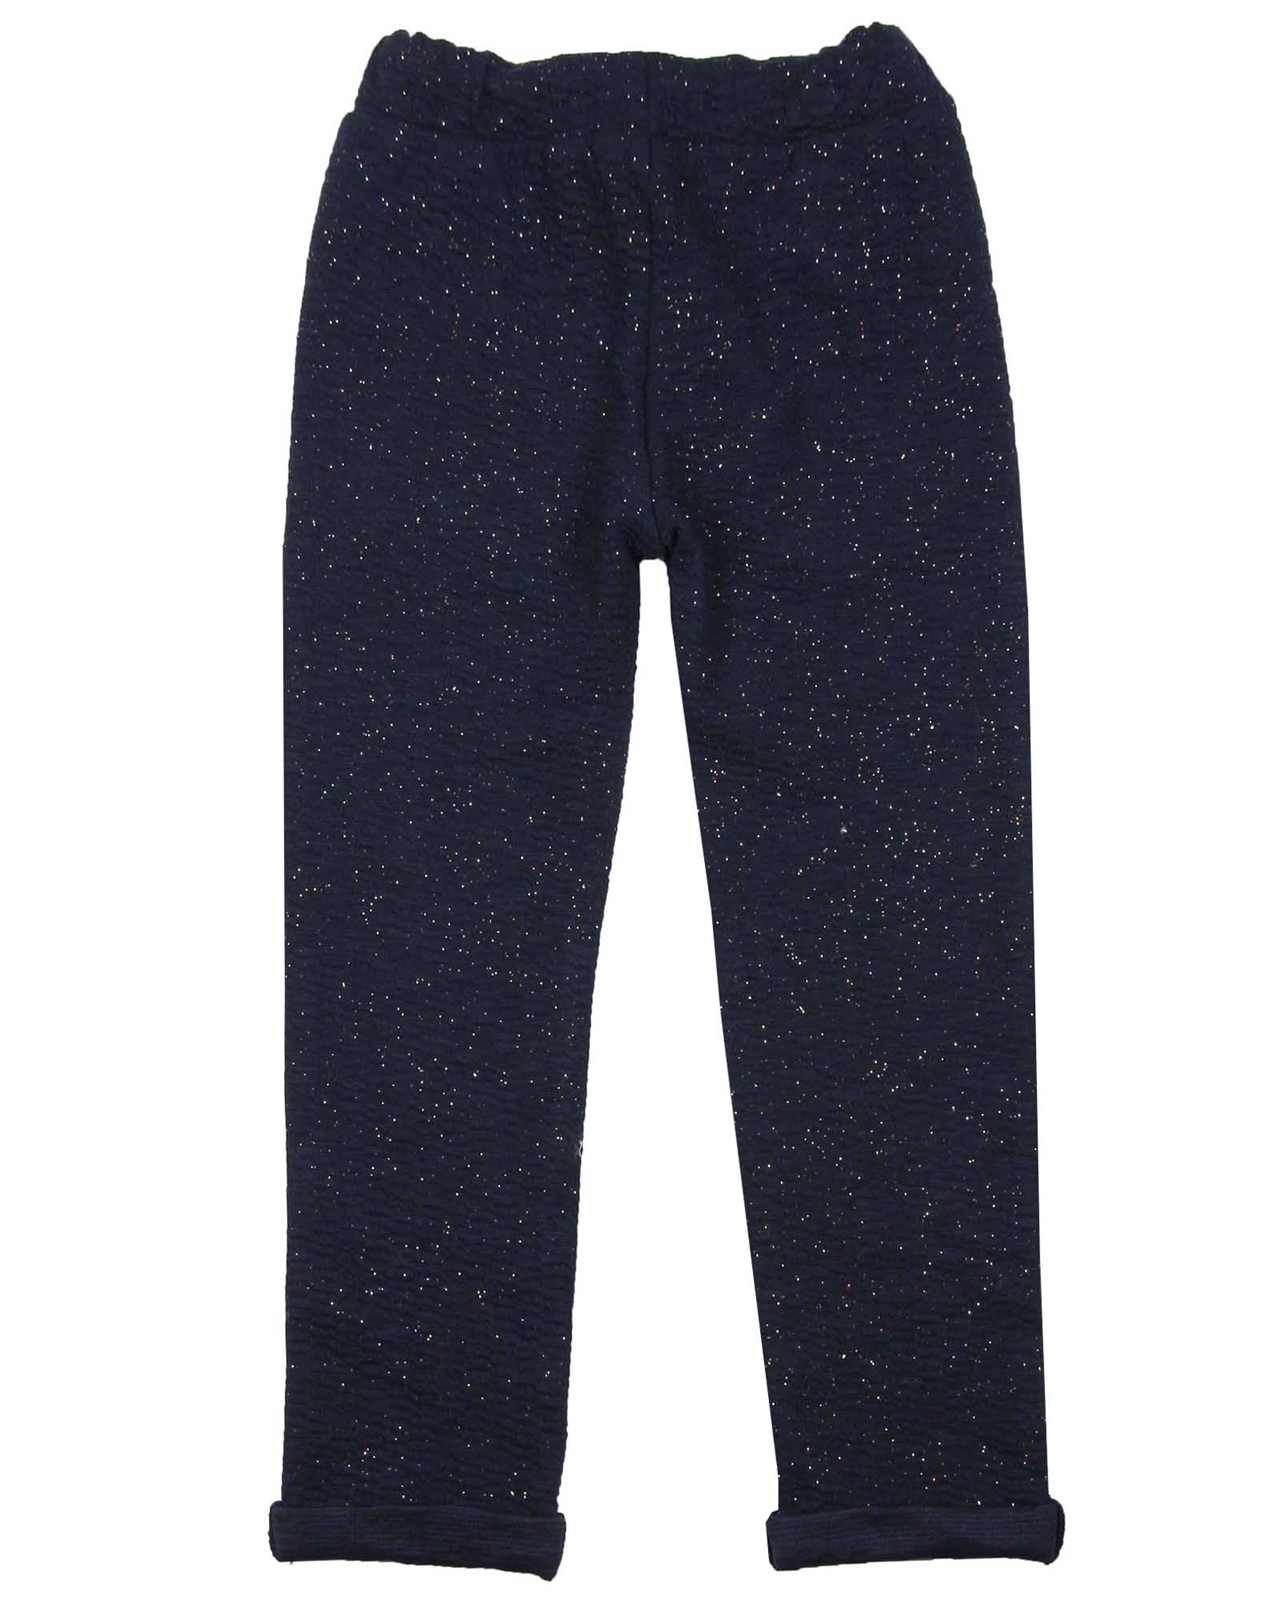 3Pommes Sparkly Sweatpants - 3Pommes - 3Pommes Fall Winter 2019/2020